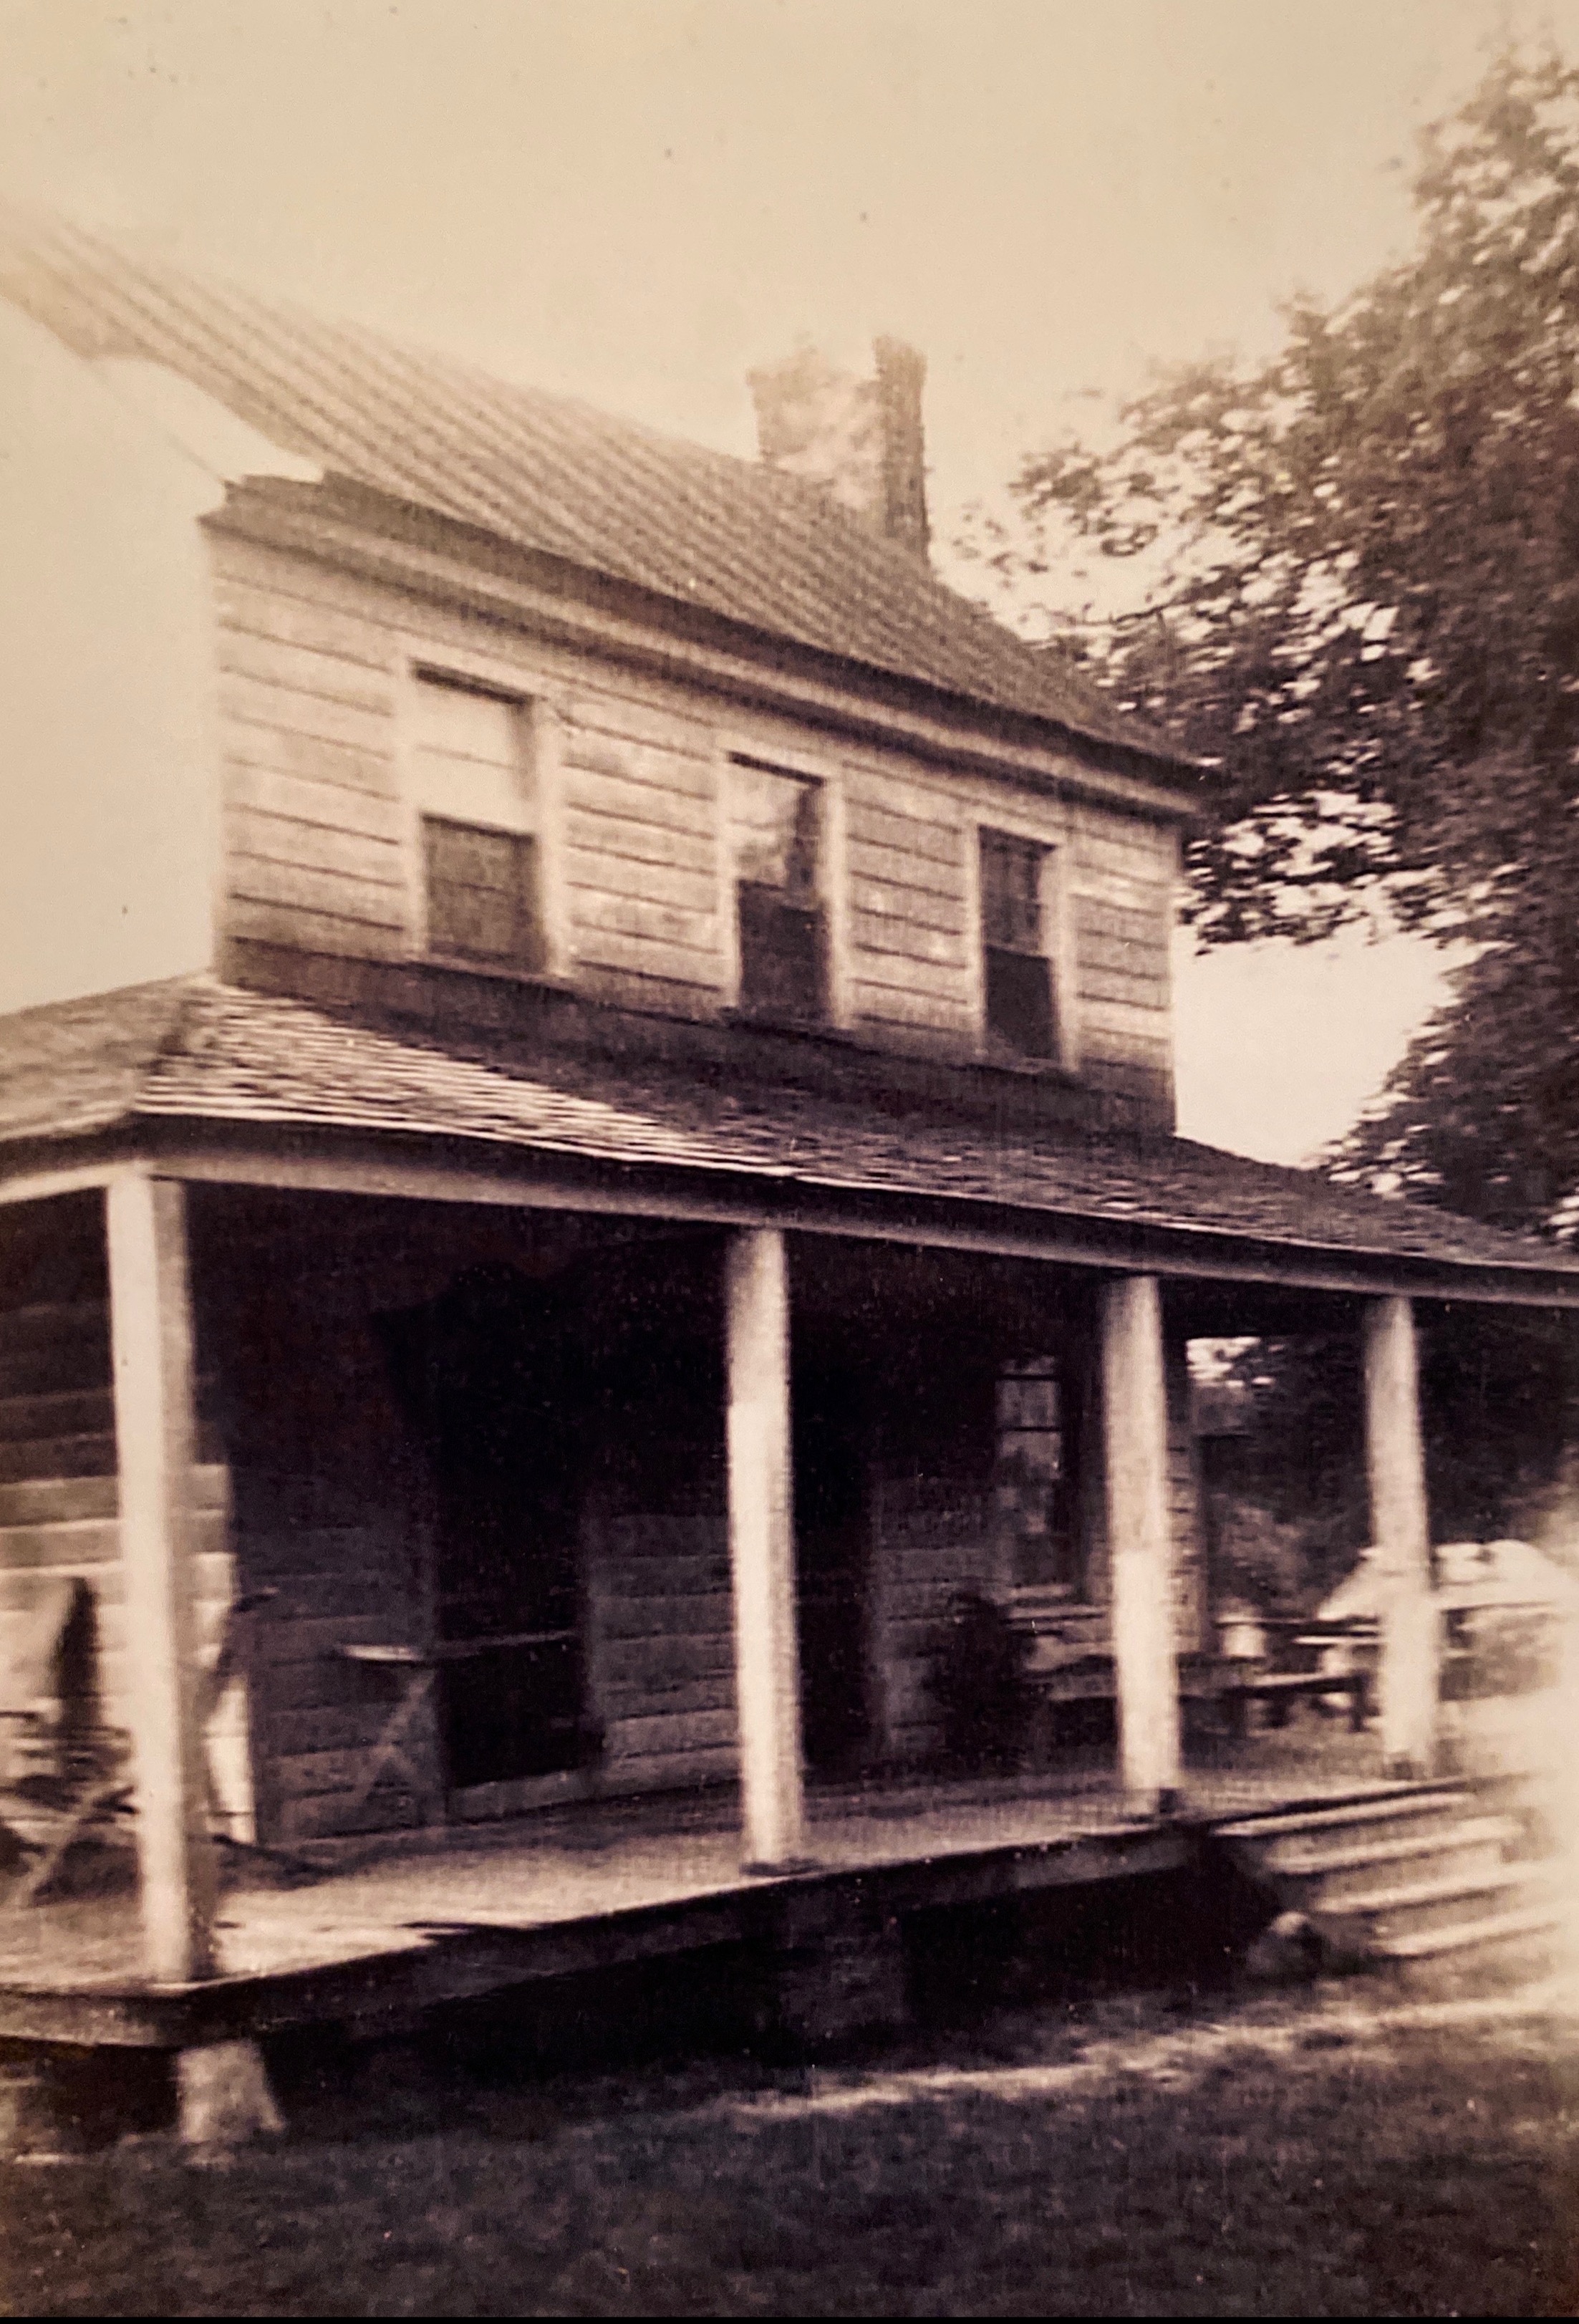 Home of Peter Forbes Carraway, father of Olive Carraway Bacon who was born and raised in this house. The house was probably built in the mid to late 19th century. Picture was taken in the 1930s